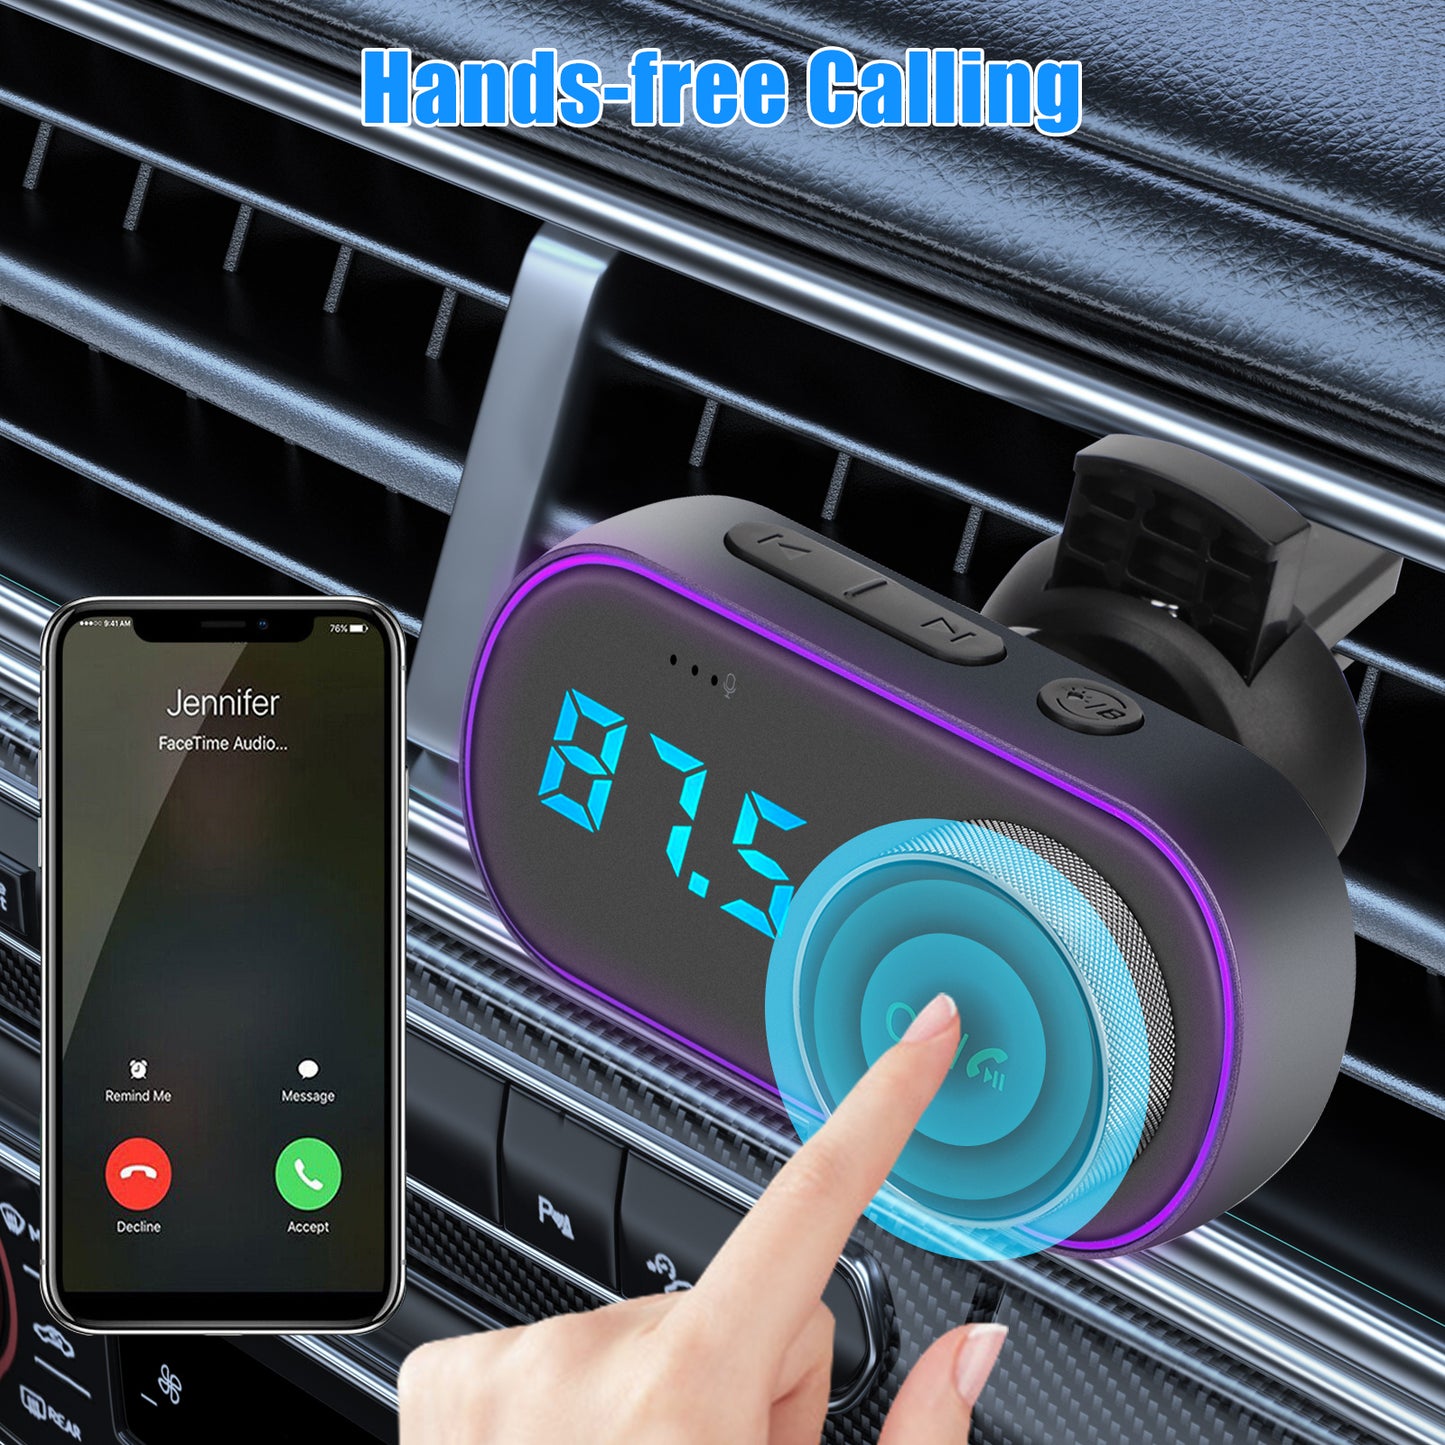 Multifunction Bluetooth Car FM MP3 Transmitter - 5.0 FM Transmitter for Car with QC3.0 & PD 18W Charger, Hands-Free Call, Support TF Card AUX Siri Google Assistant,7 types of ambient light adjustable